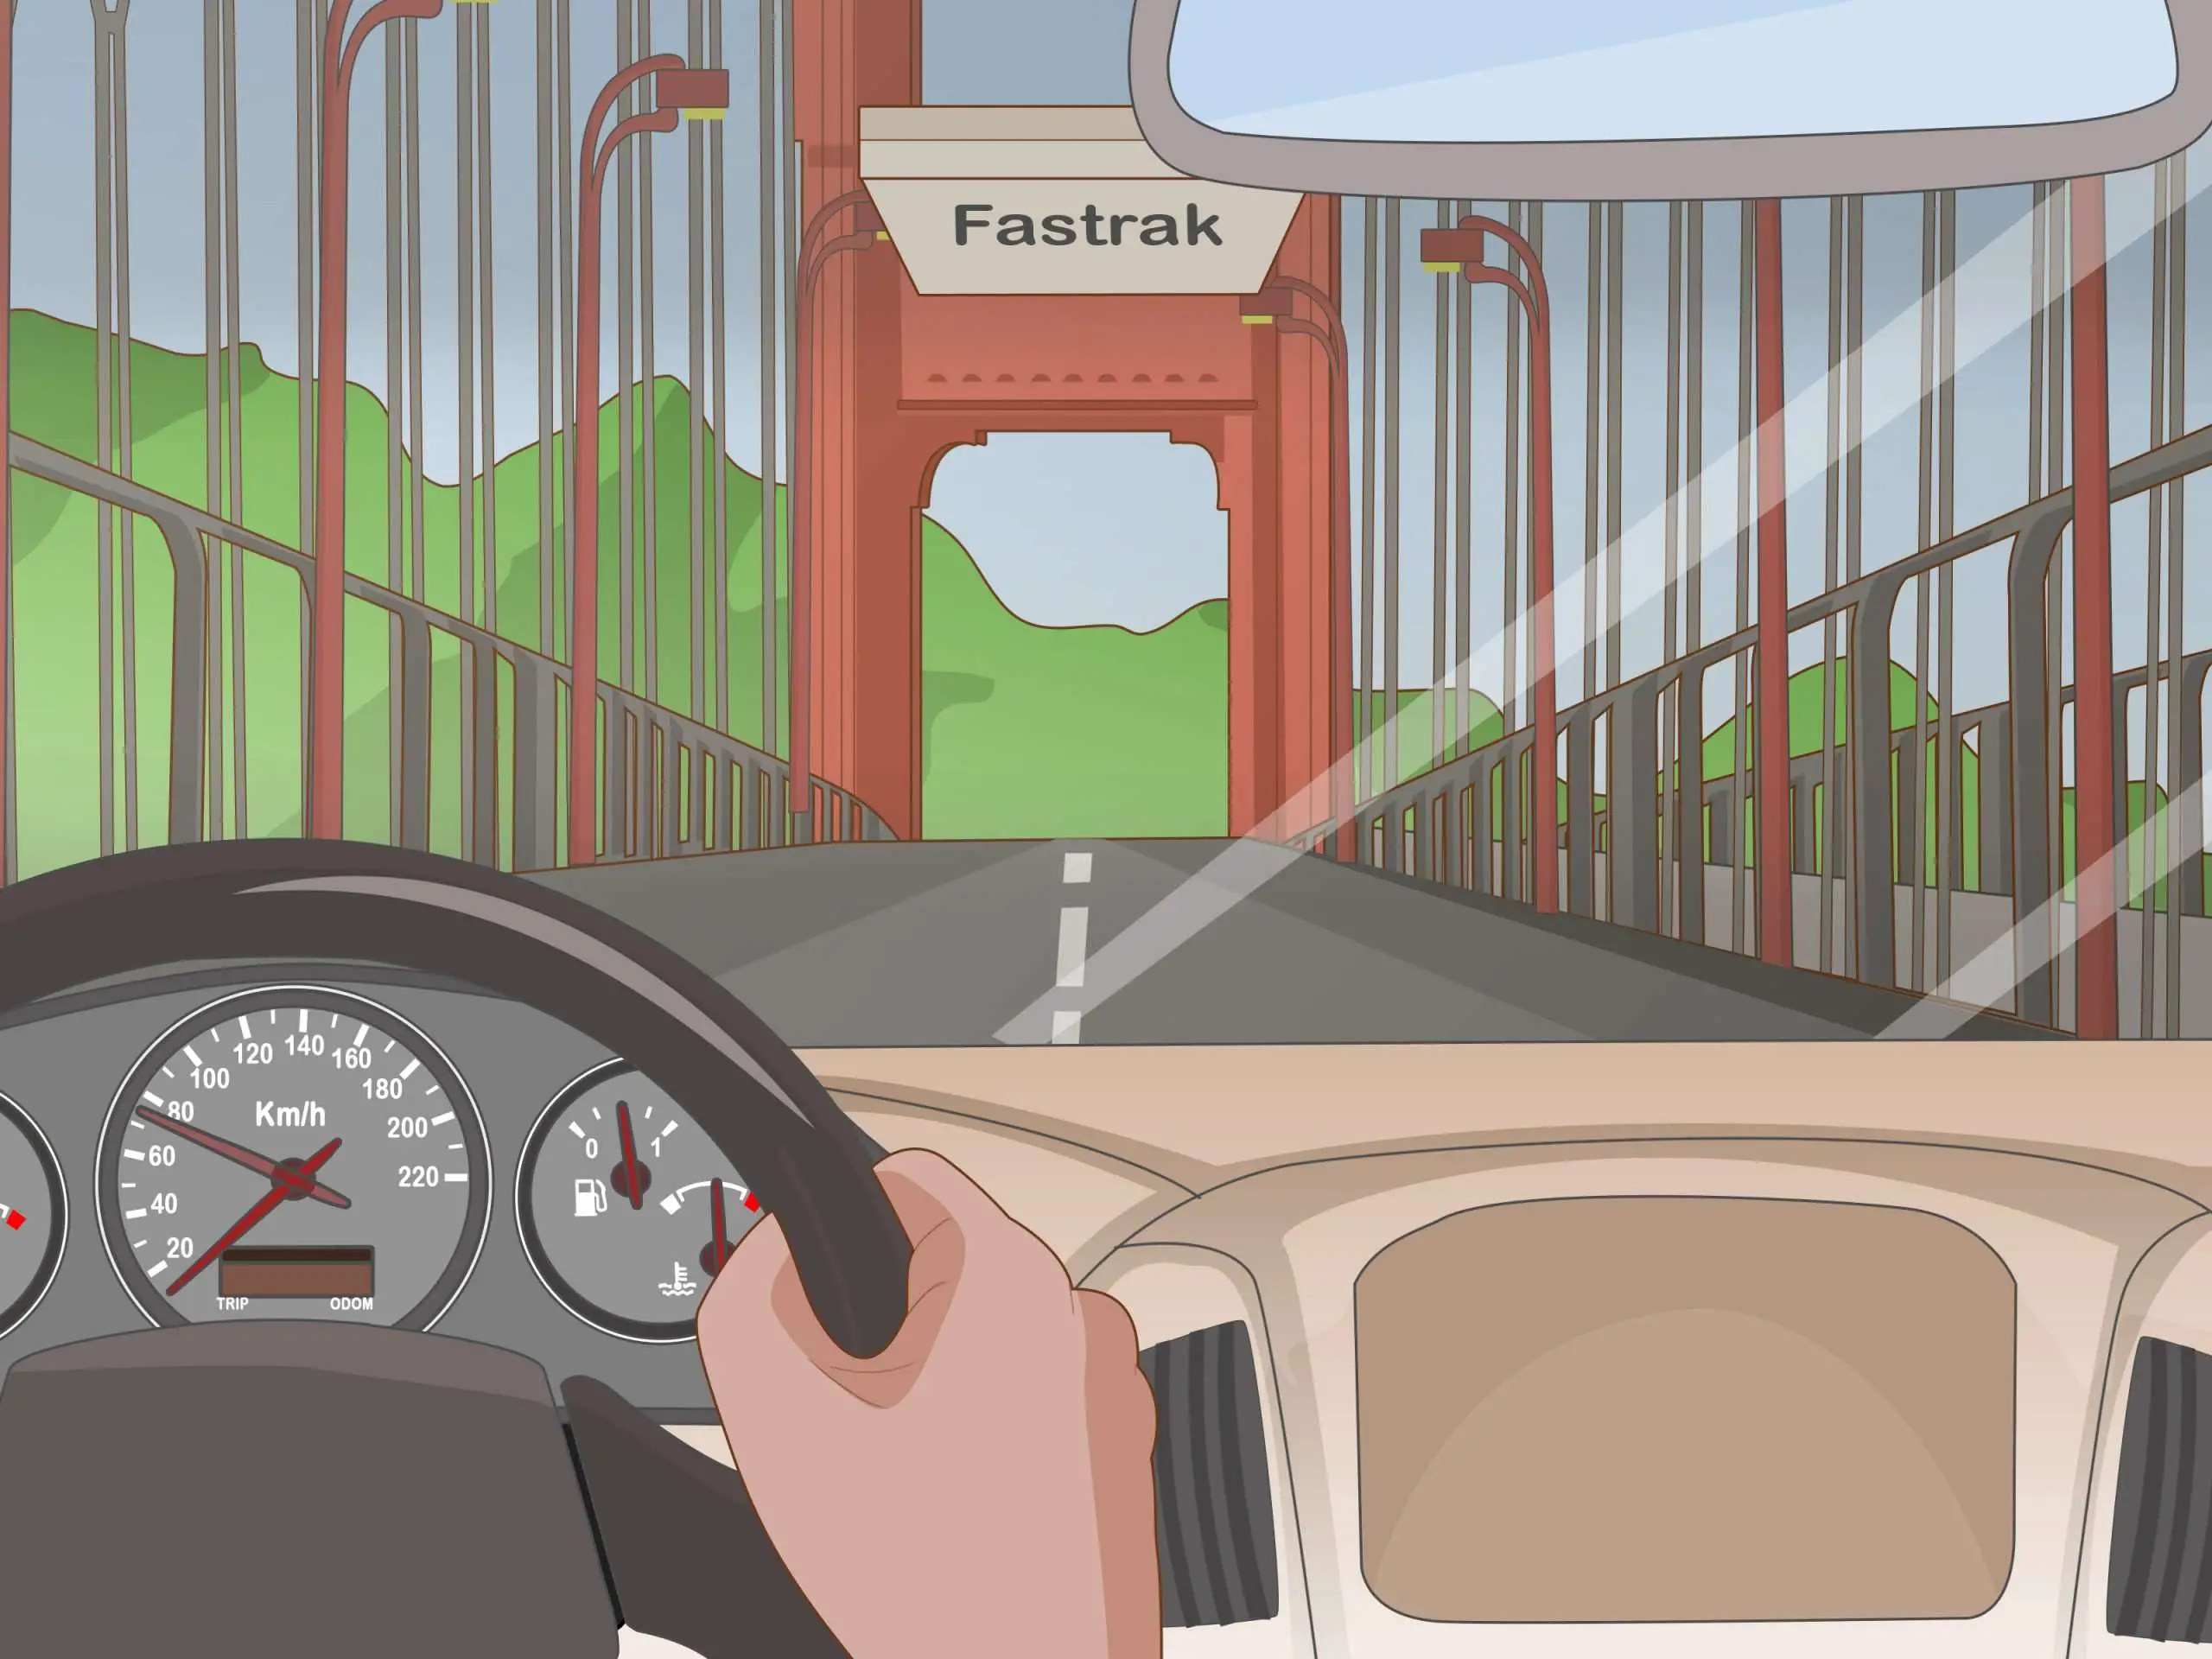 3 Ways to Pay the Golden Gate Bridge Toll